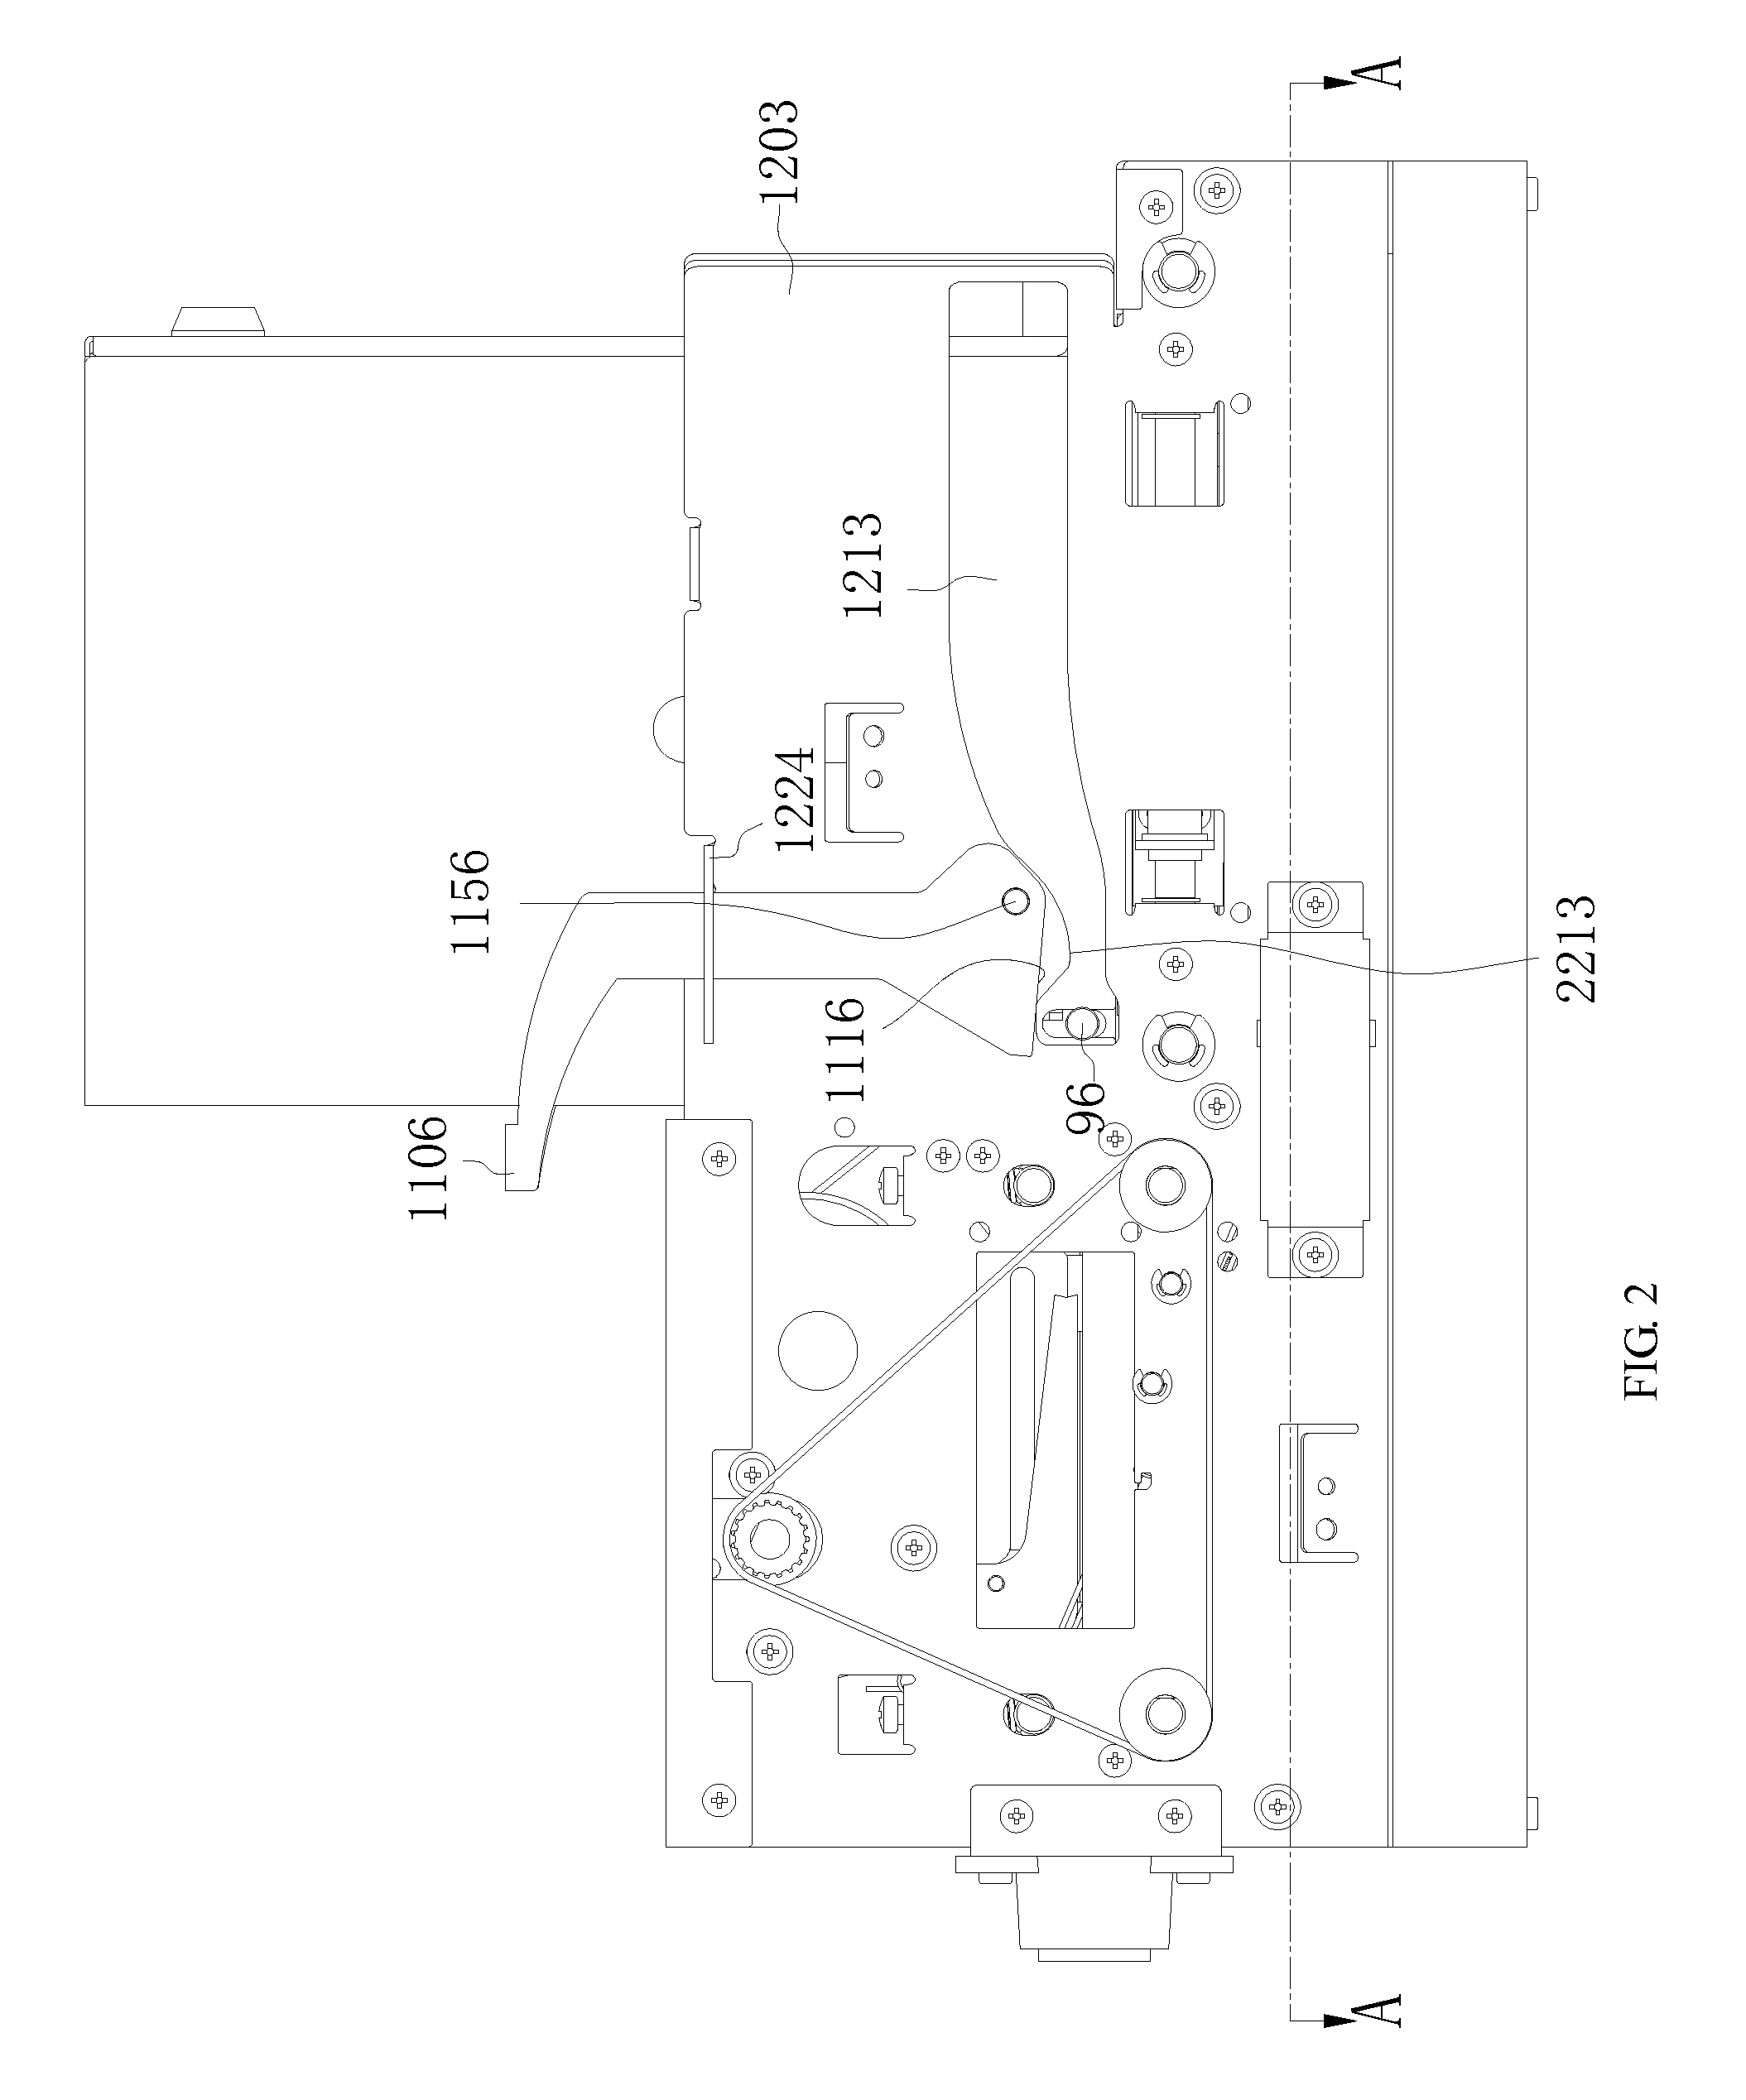 Apparatus for receiving and dispensing cards automatically